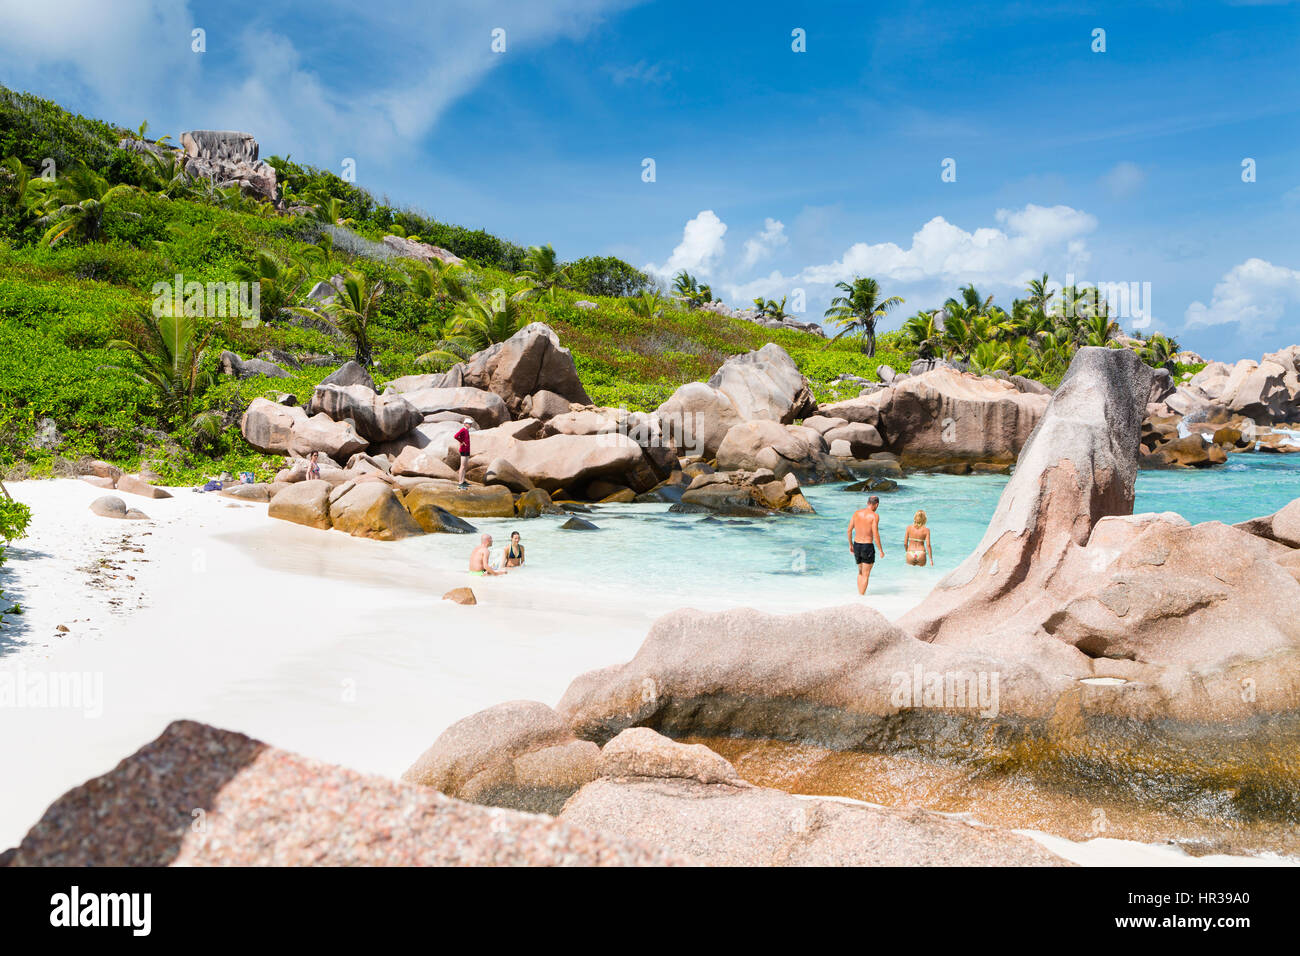 LA DIGUE - AUGUST 10: Tourists enjoying the perfect beach Anse Cocos in La Digue, Seychelles on August 10, 2014 Stock Photo